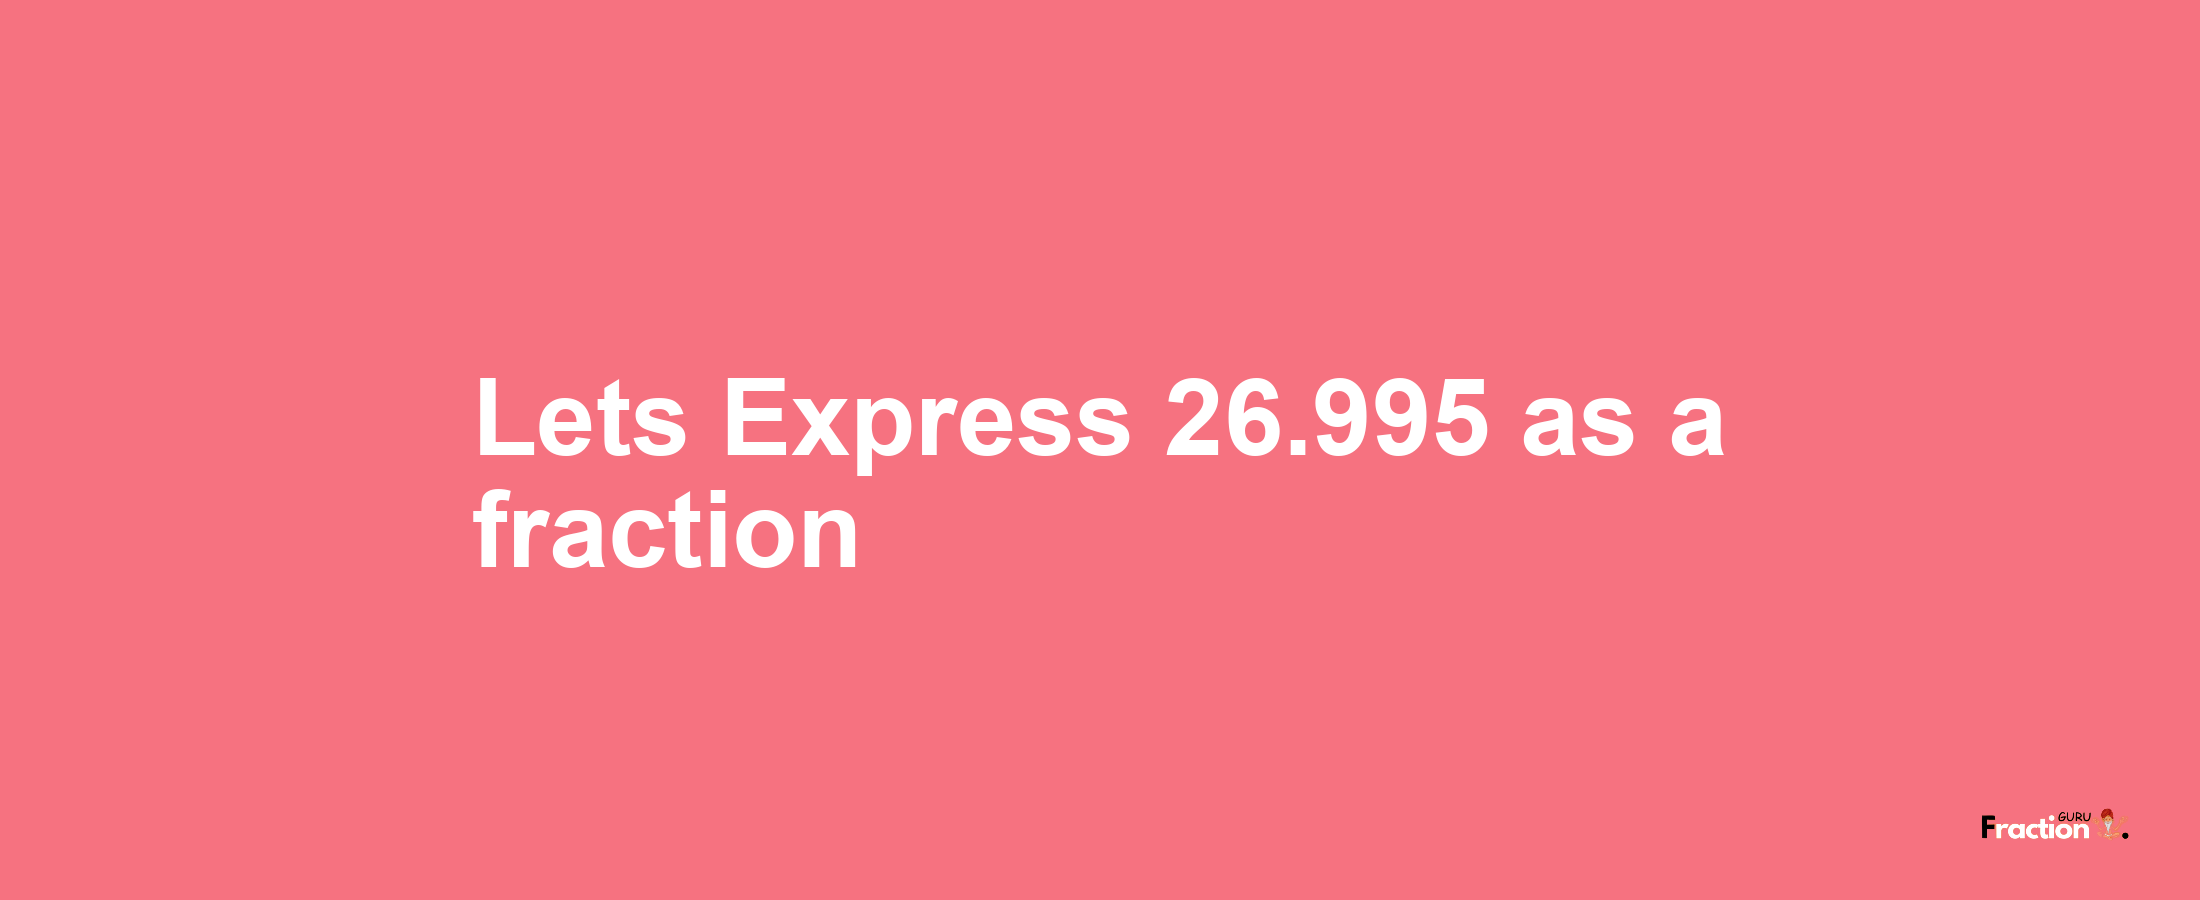 Lets Express 26.995 as afraction